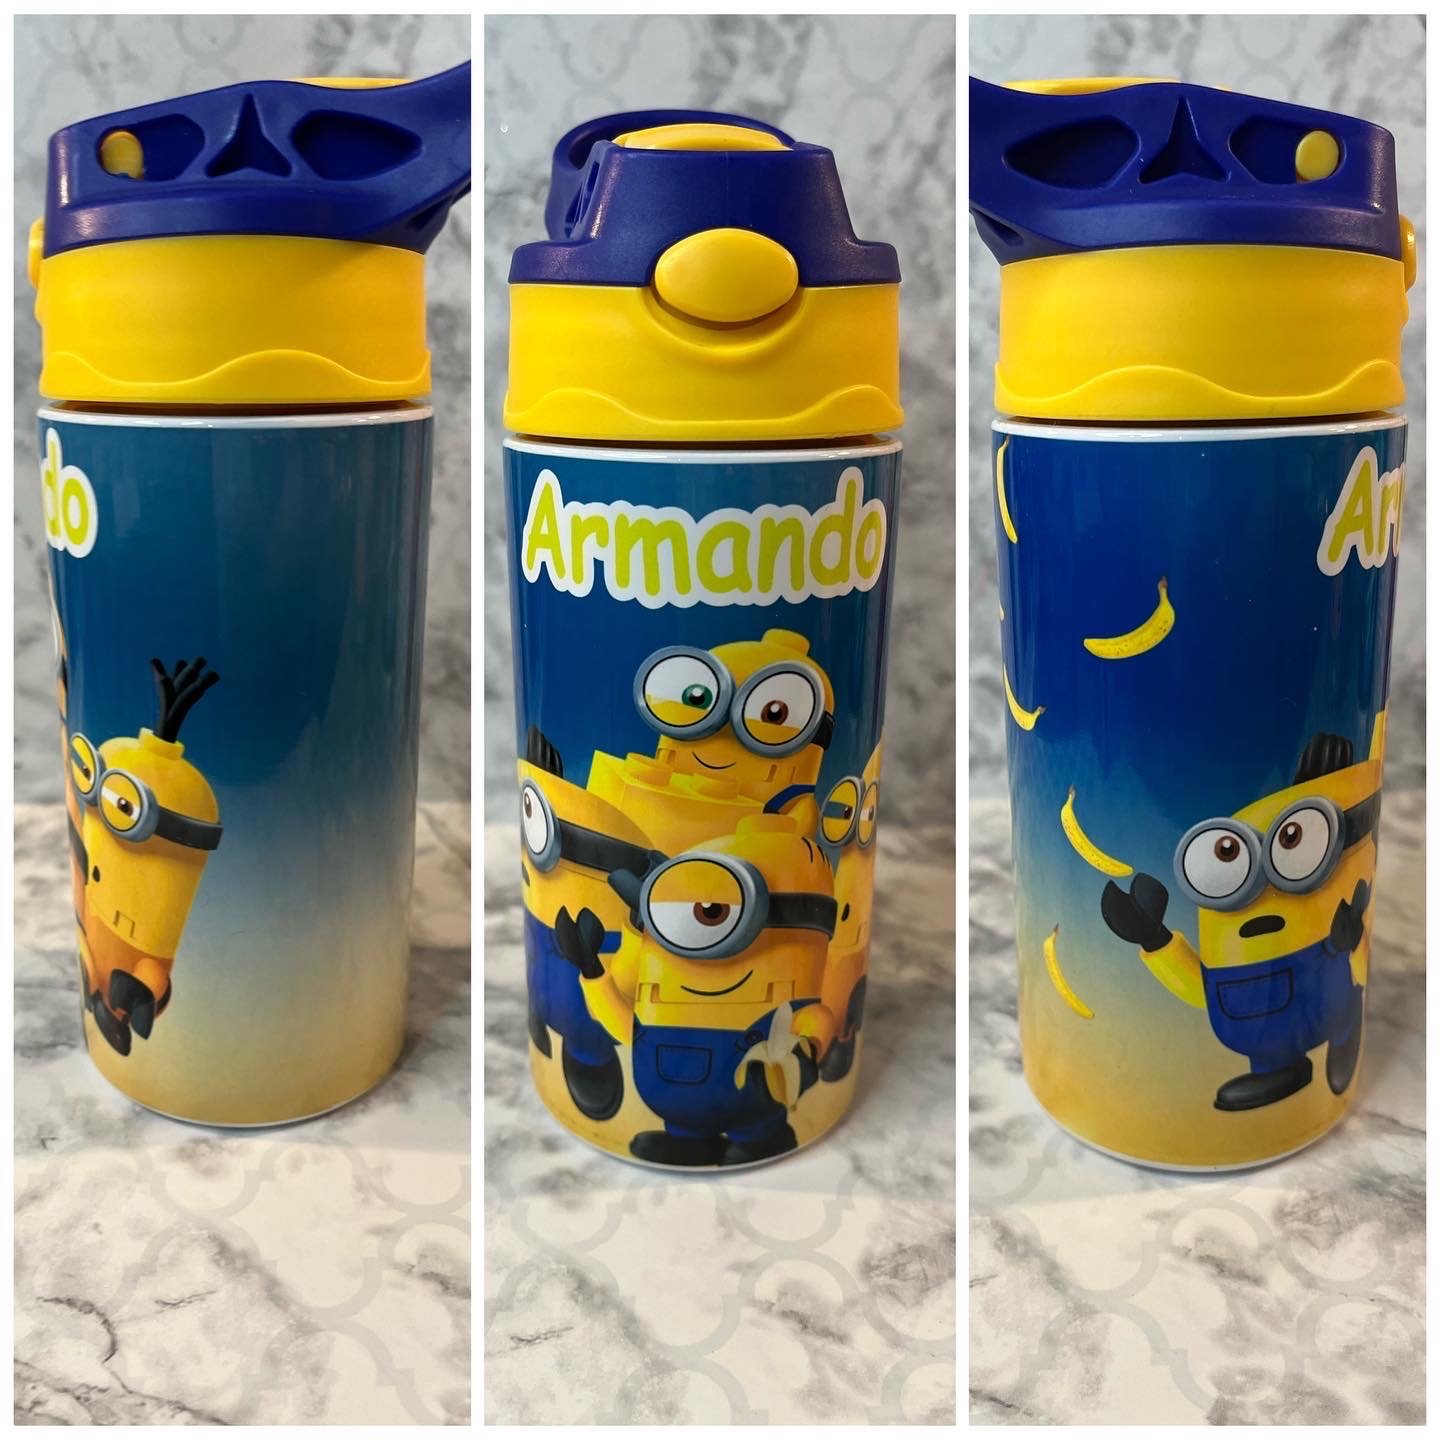 https://assets.bigcartel.com/product_images/99934015-b6c1-46be-a9f6-9bcfe6ad611e/minions-kids-water-bottle.jpg?auto=format&fit=max&w=1540